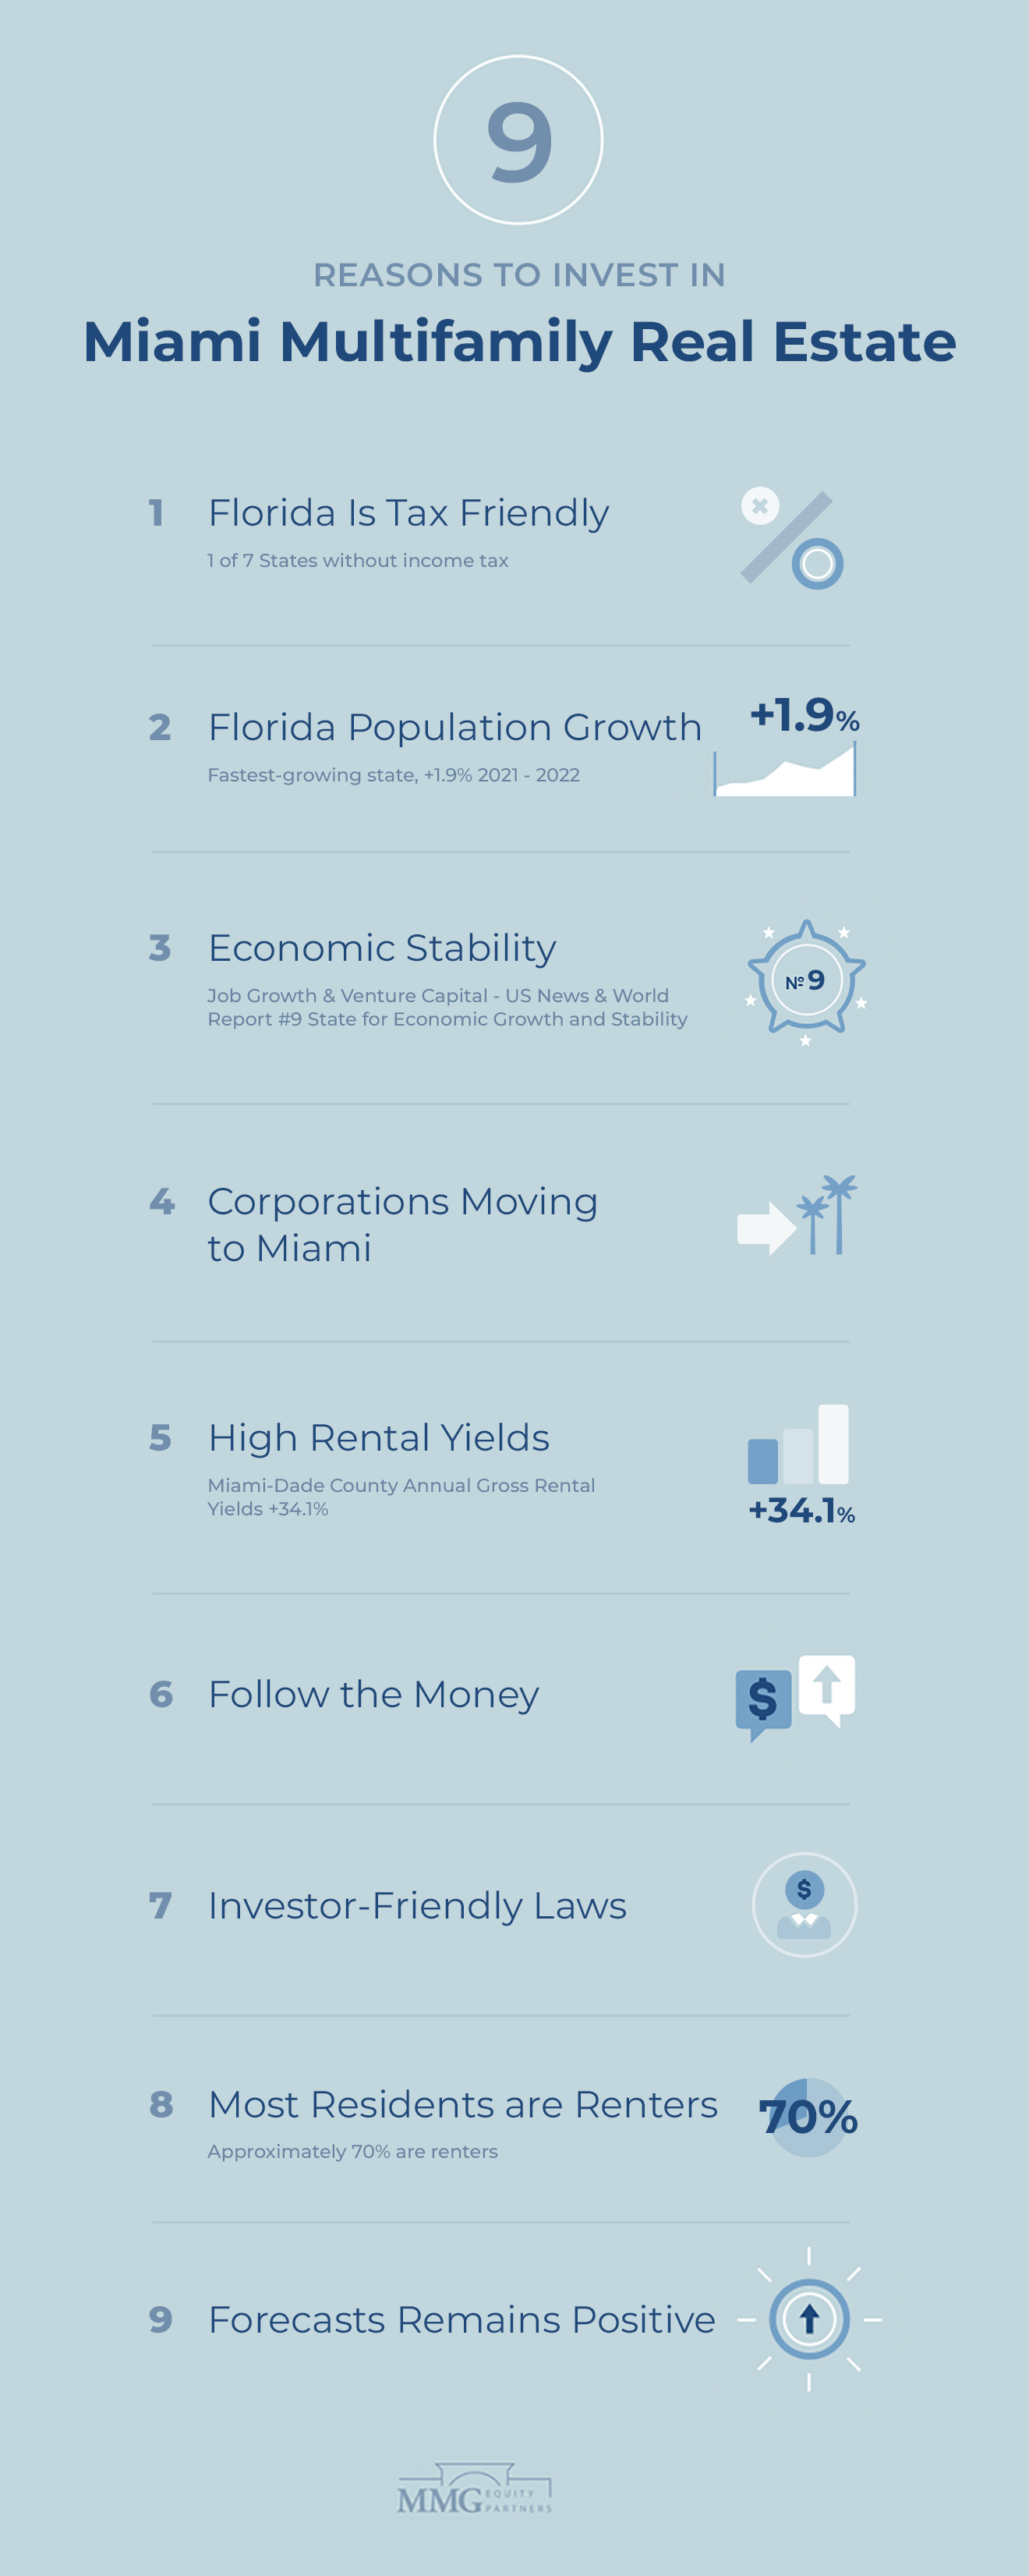 Reasons to Invest in Miami Multifamily Real Estate 2023 - MMG Equity Partners